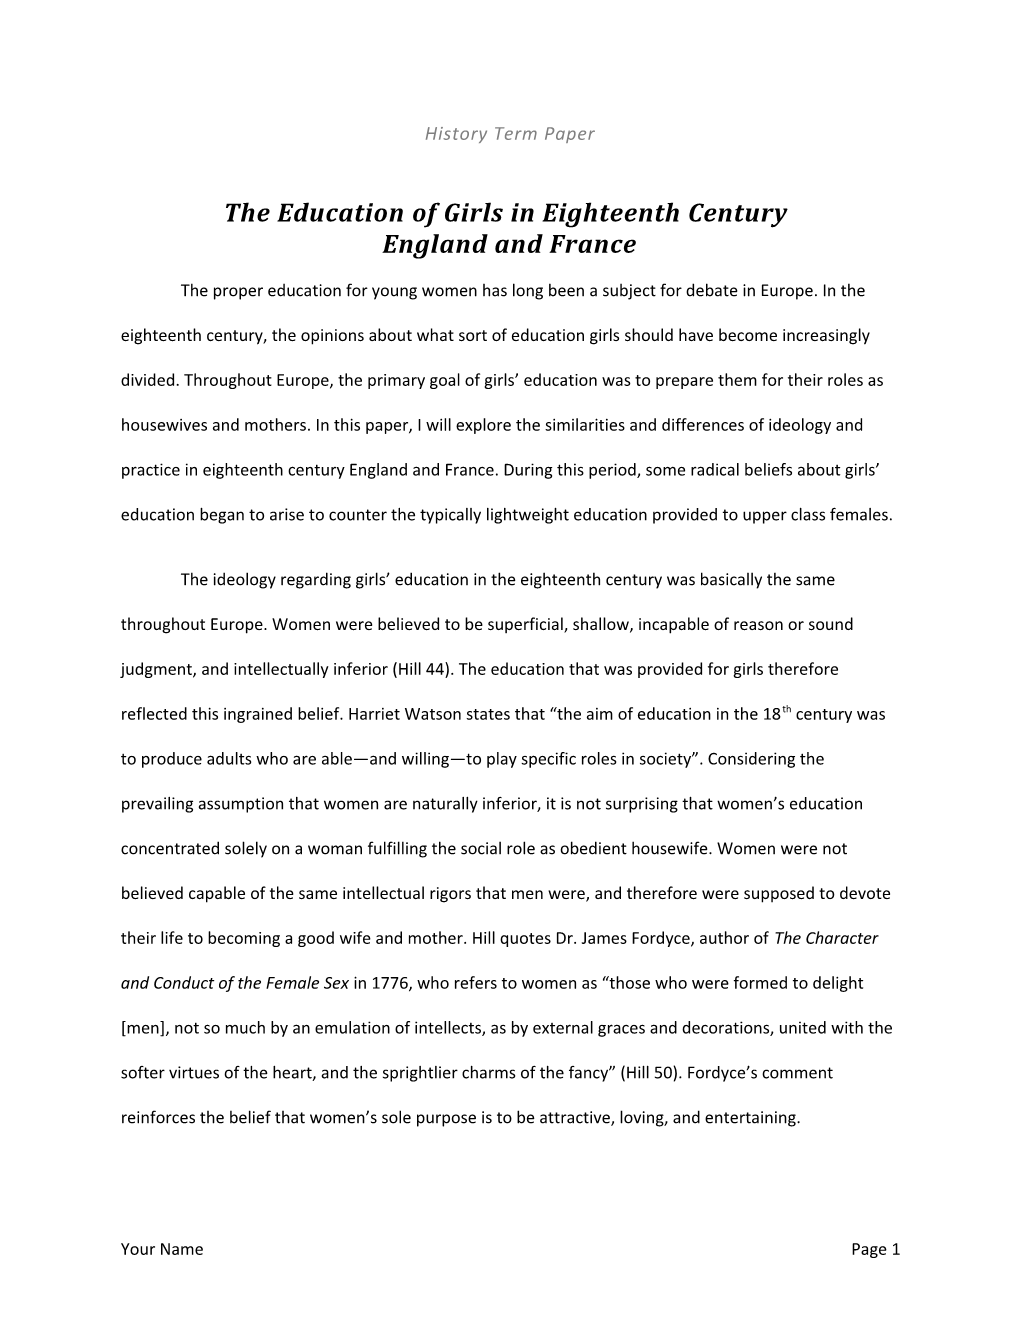 The Education of Girls in Eighteenth Century England and France